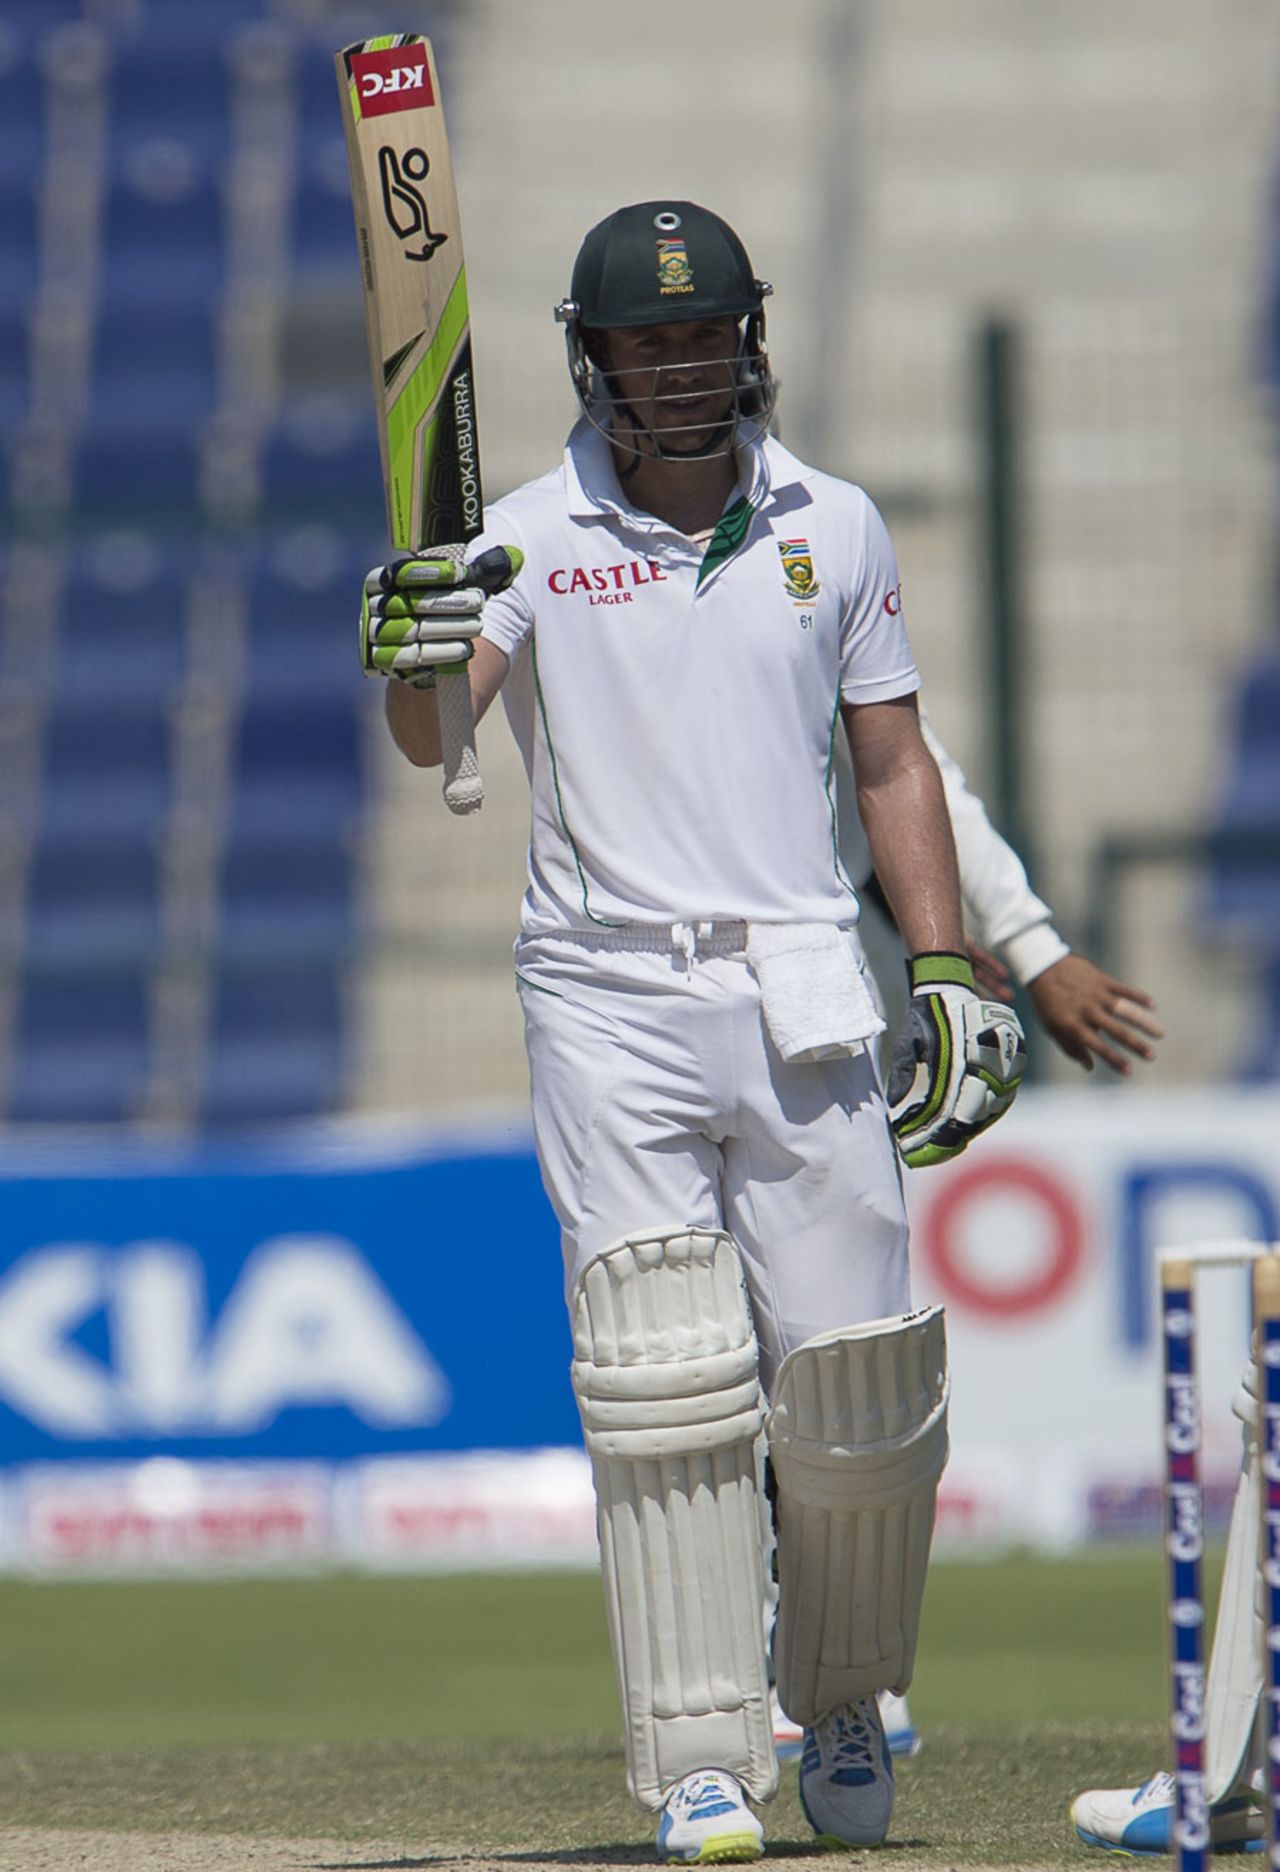 AB de Villiers raises his bat after reaching his half-century, Pakistan v South Africa, 1st Test, 4th day, Abu Dhabi, October 17, 2013